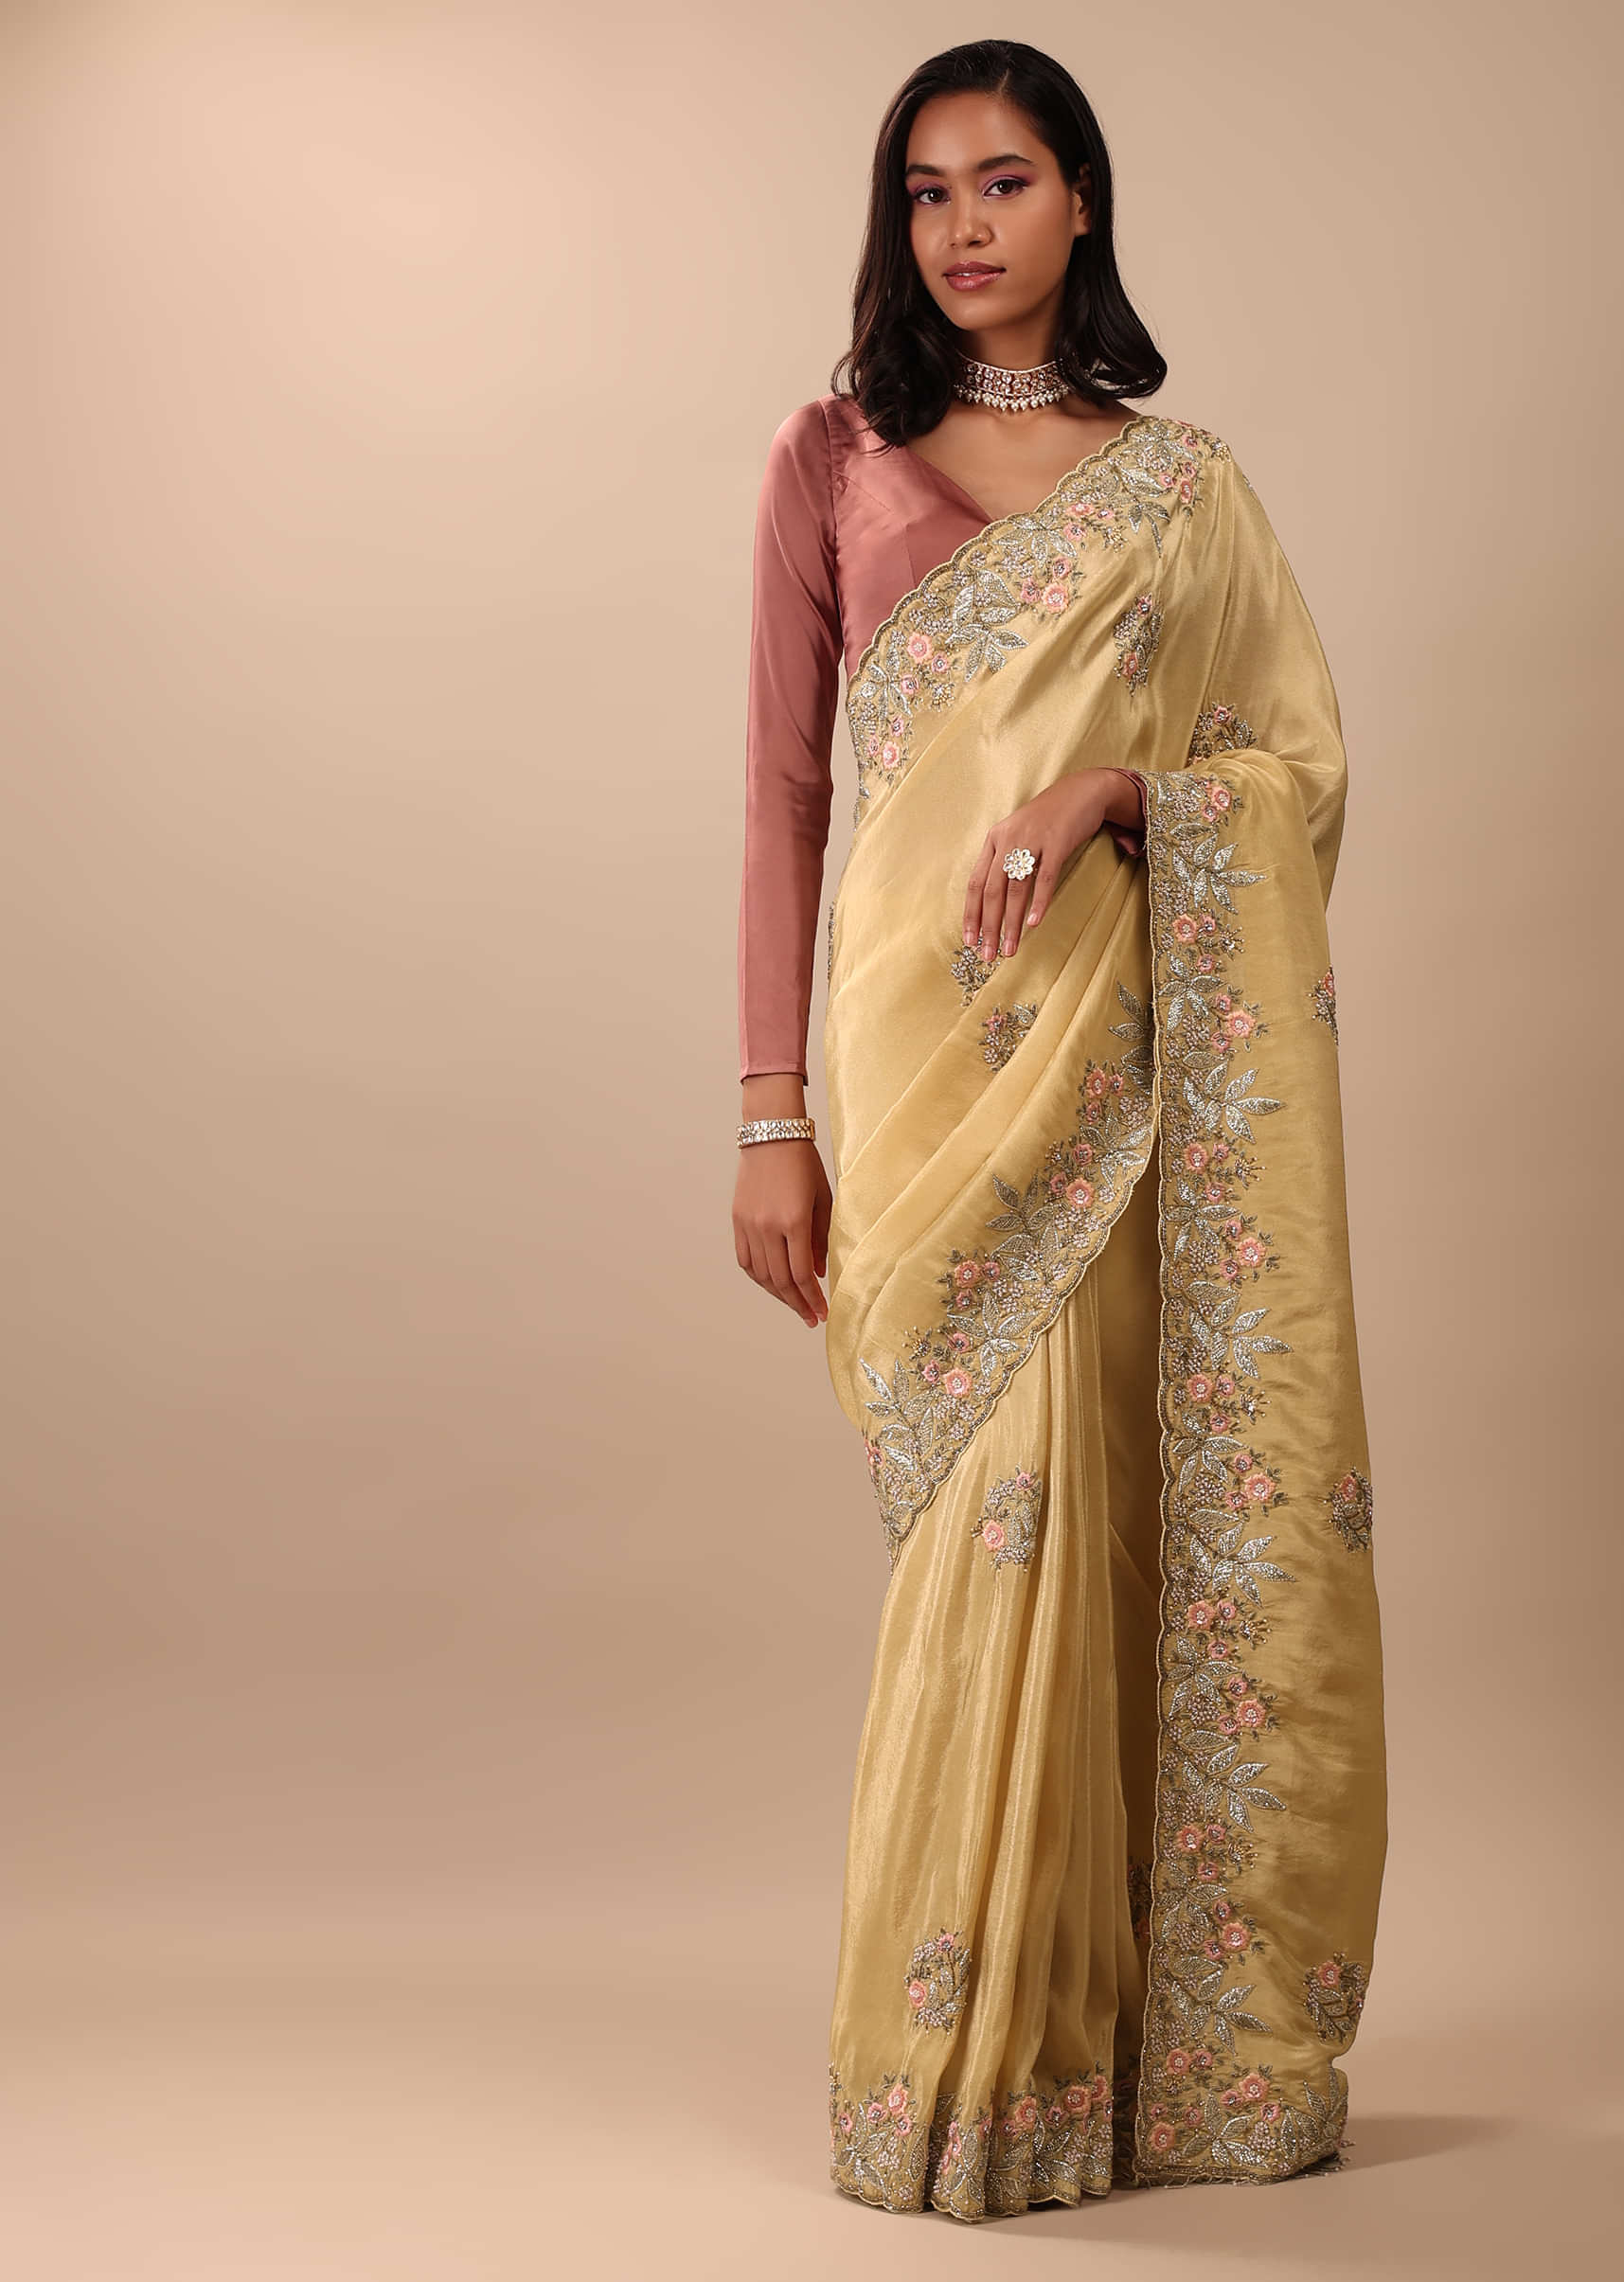 Canary Gold Yellow Saree In Glass Tissue Fabric And Gotta Resham Embroidery With Zardosi, Moti & Sequins